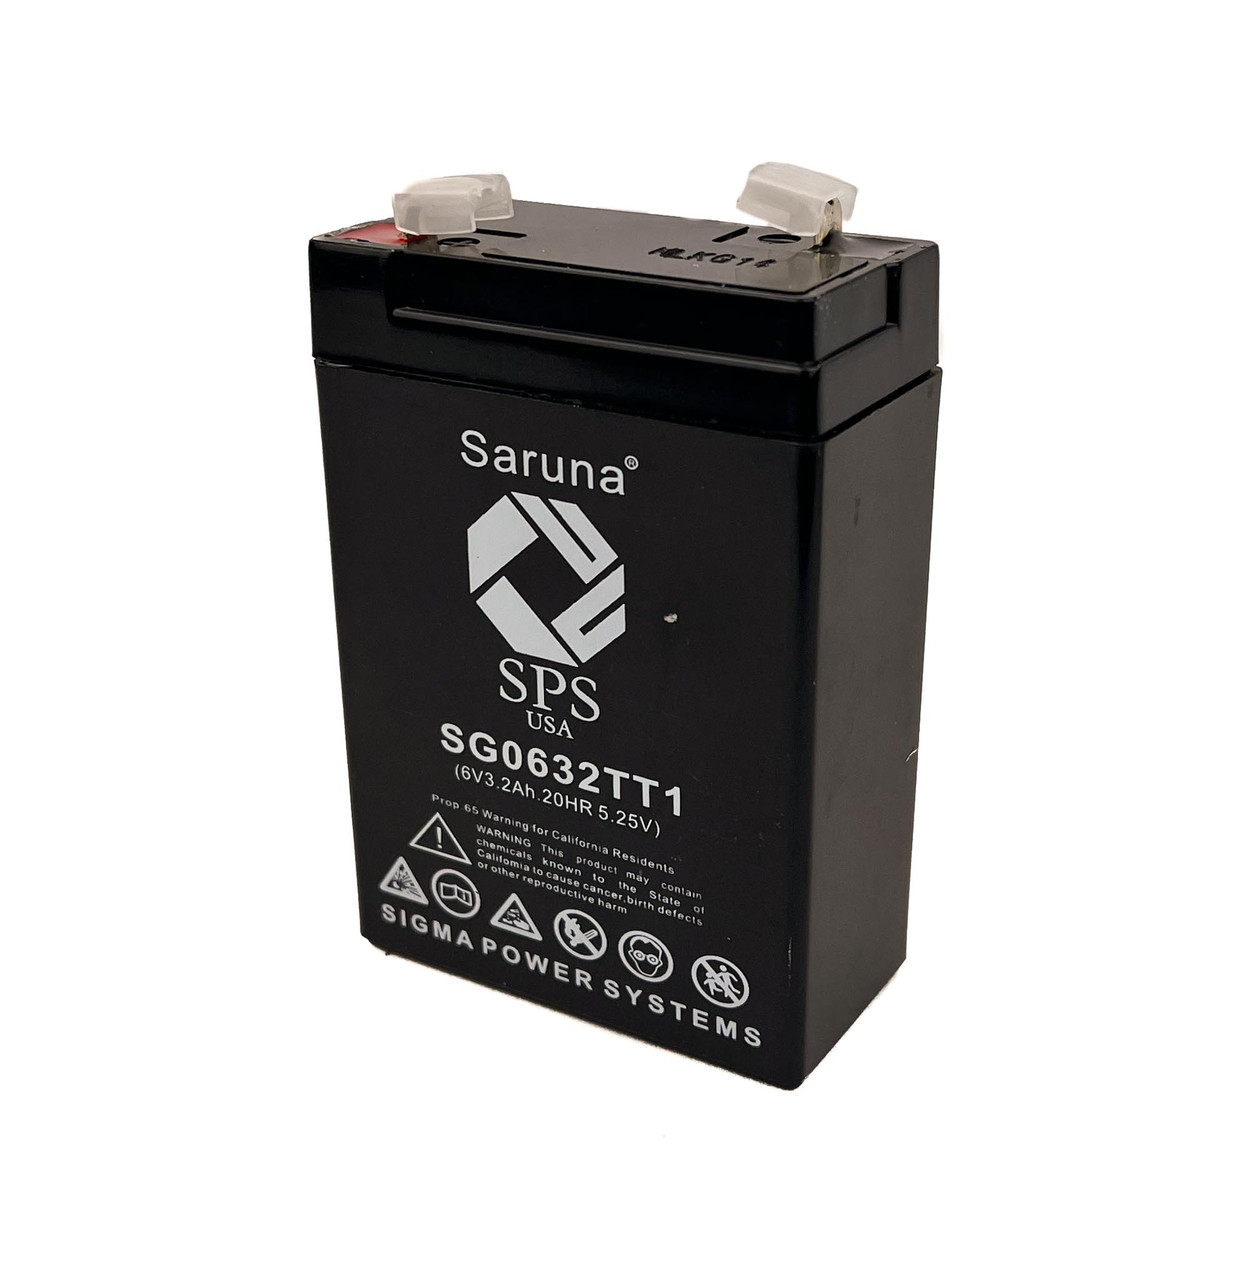 Raion Power 6V 3.2Ah Non-Spillable Replacement Rechargebale Battery for Sentry PM638